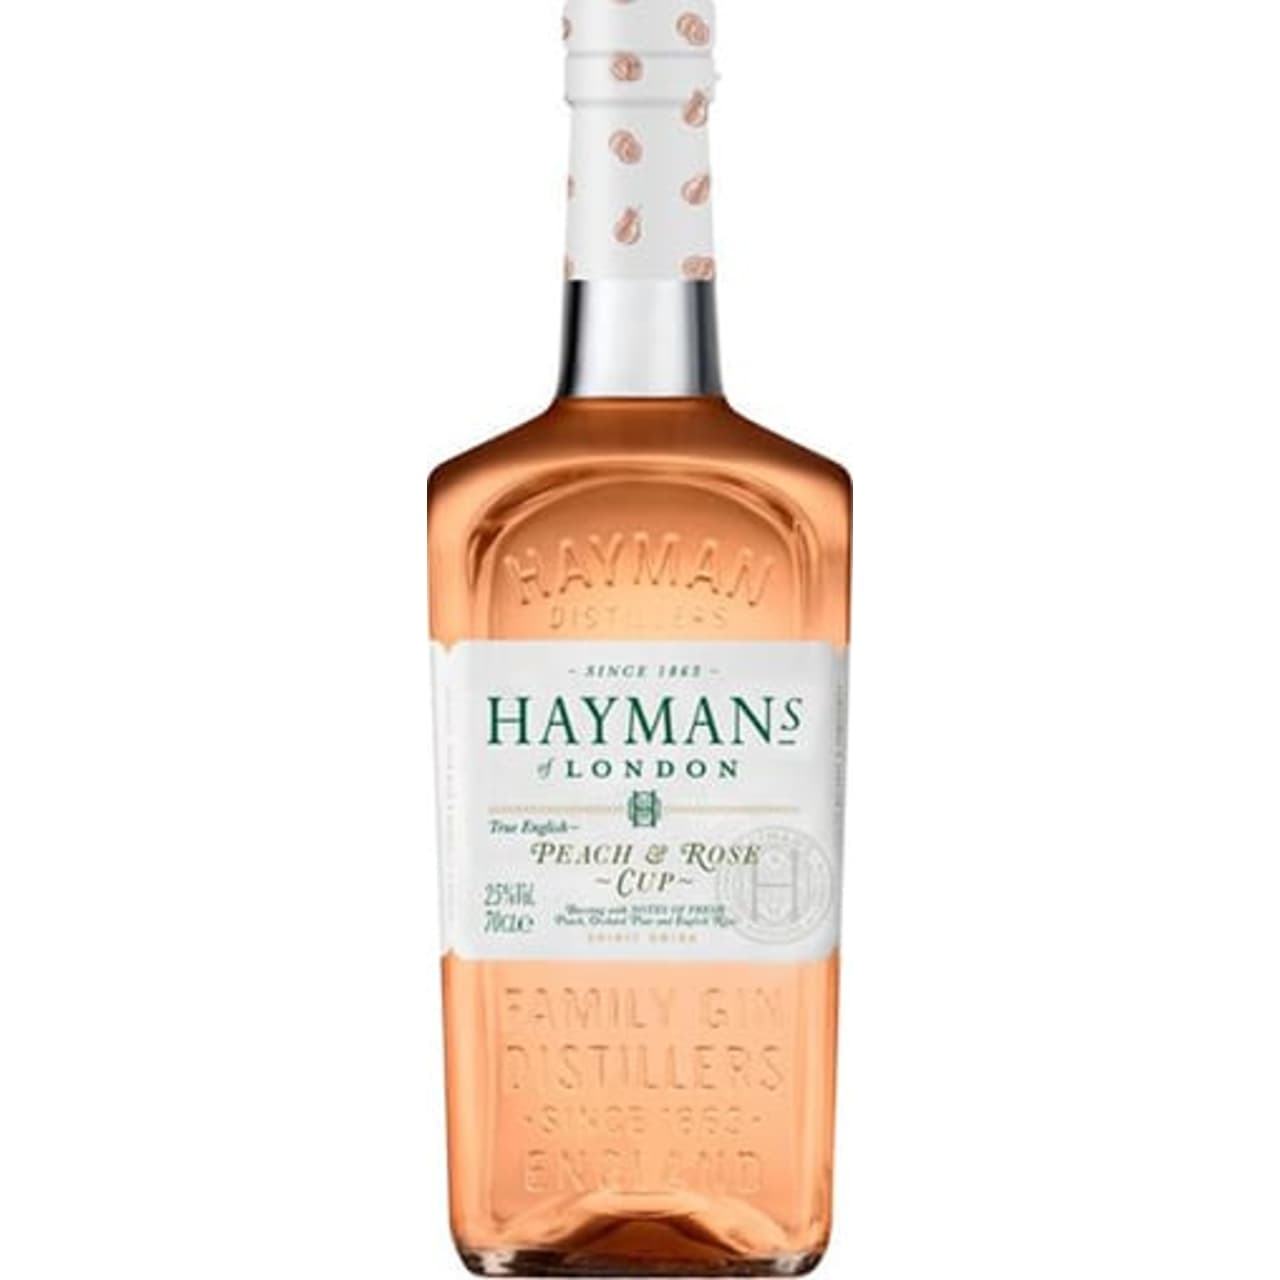 A refreshing taste of summer. Haymans Peach and Rose Cup combines their London Dry Gin with notes of fresh peach, sweet fragrant rose and juicy orchard fruit.